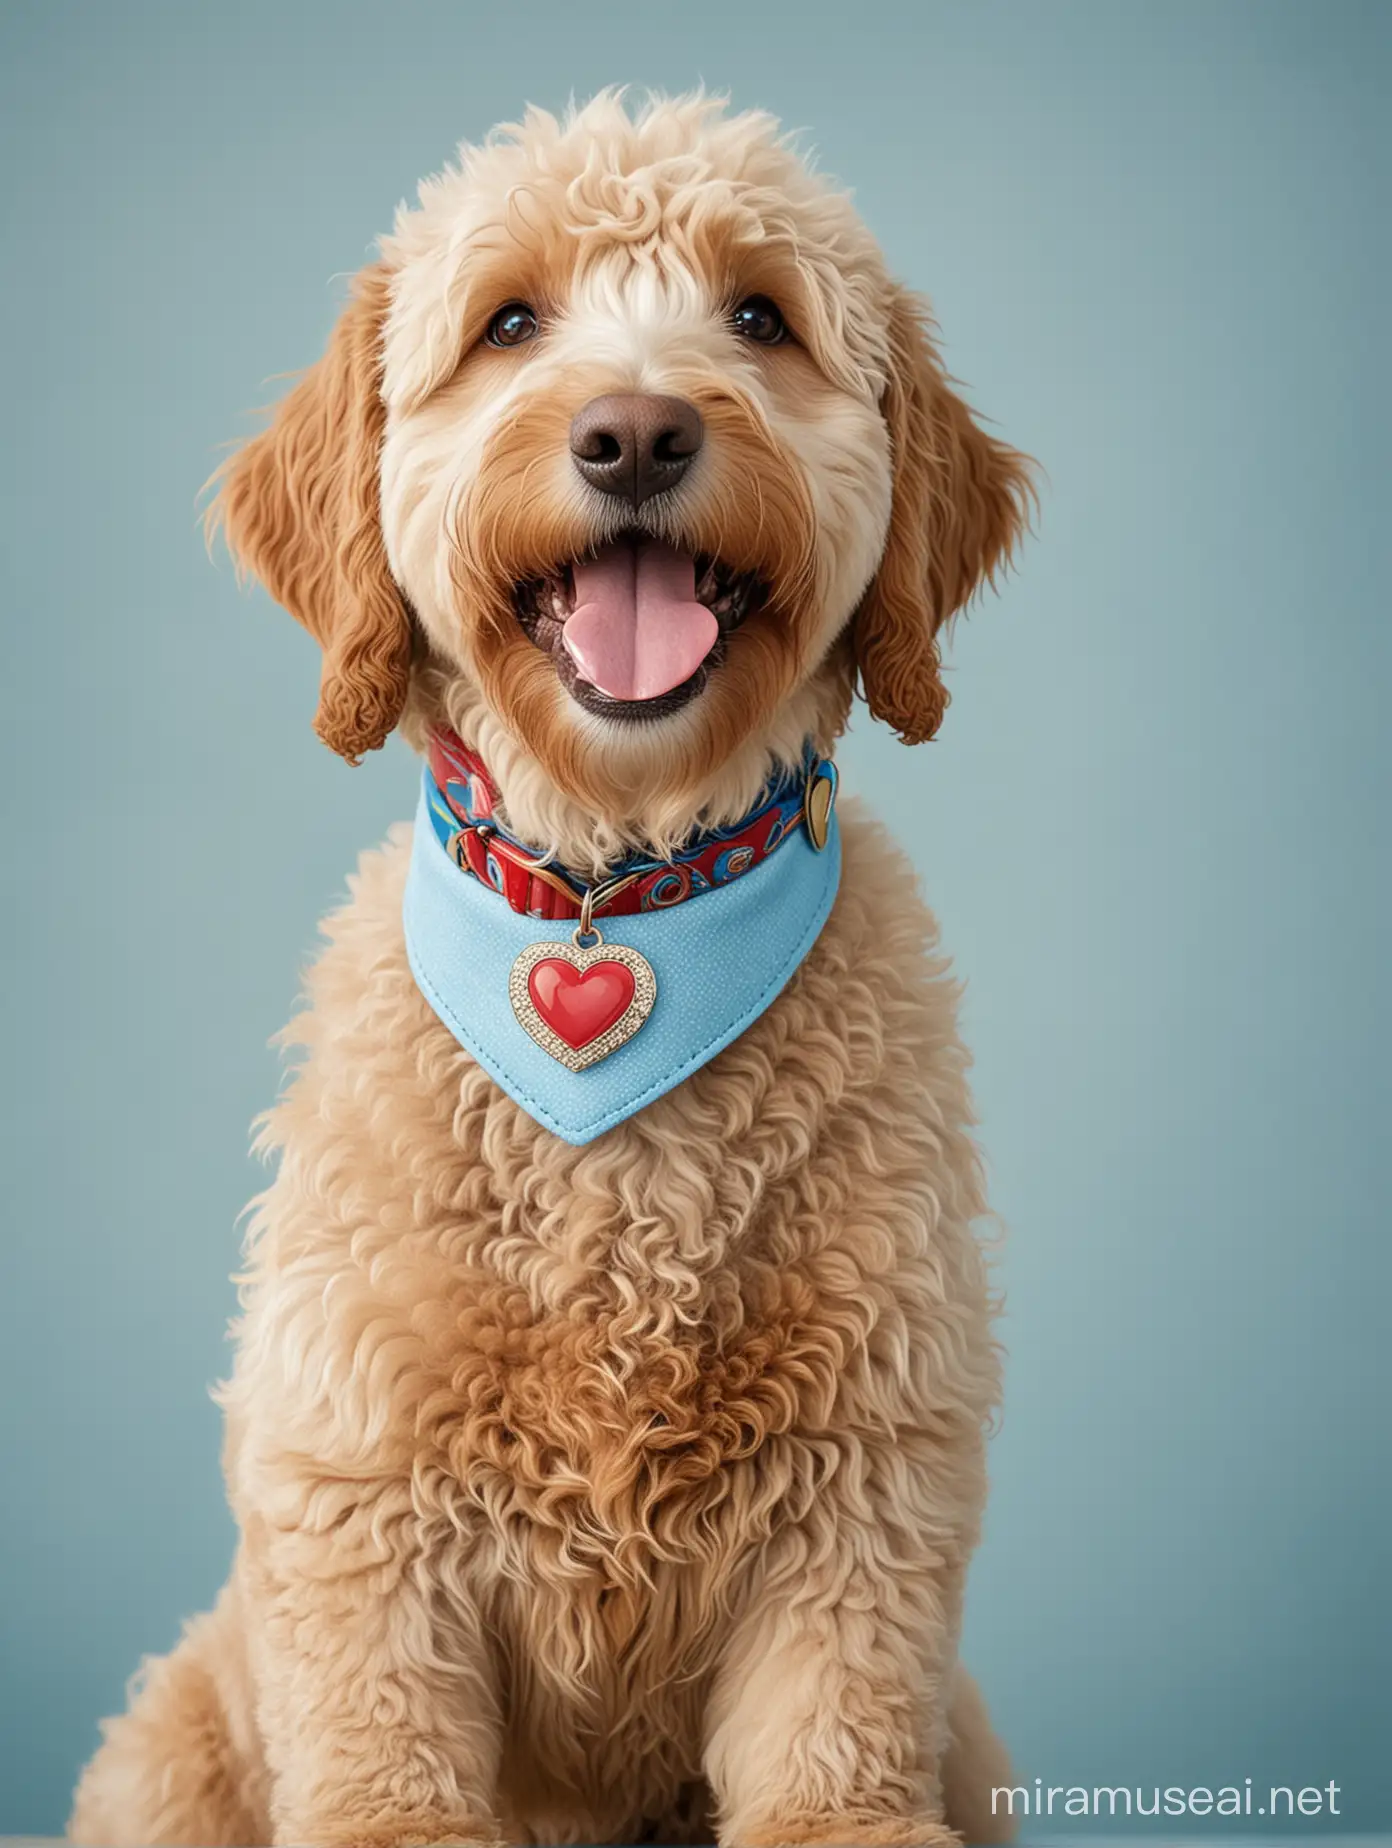 Happy Golden Doodle with Heart Pin on Blue Collar on Light Blue Background